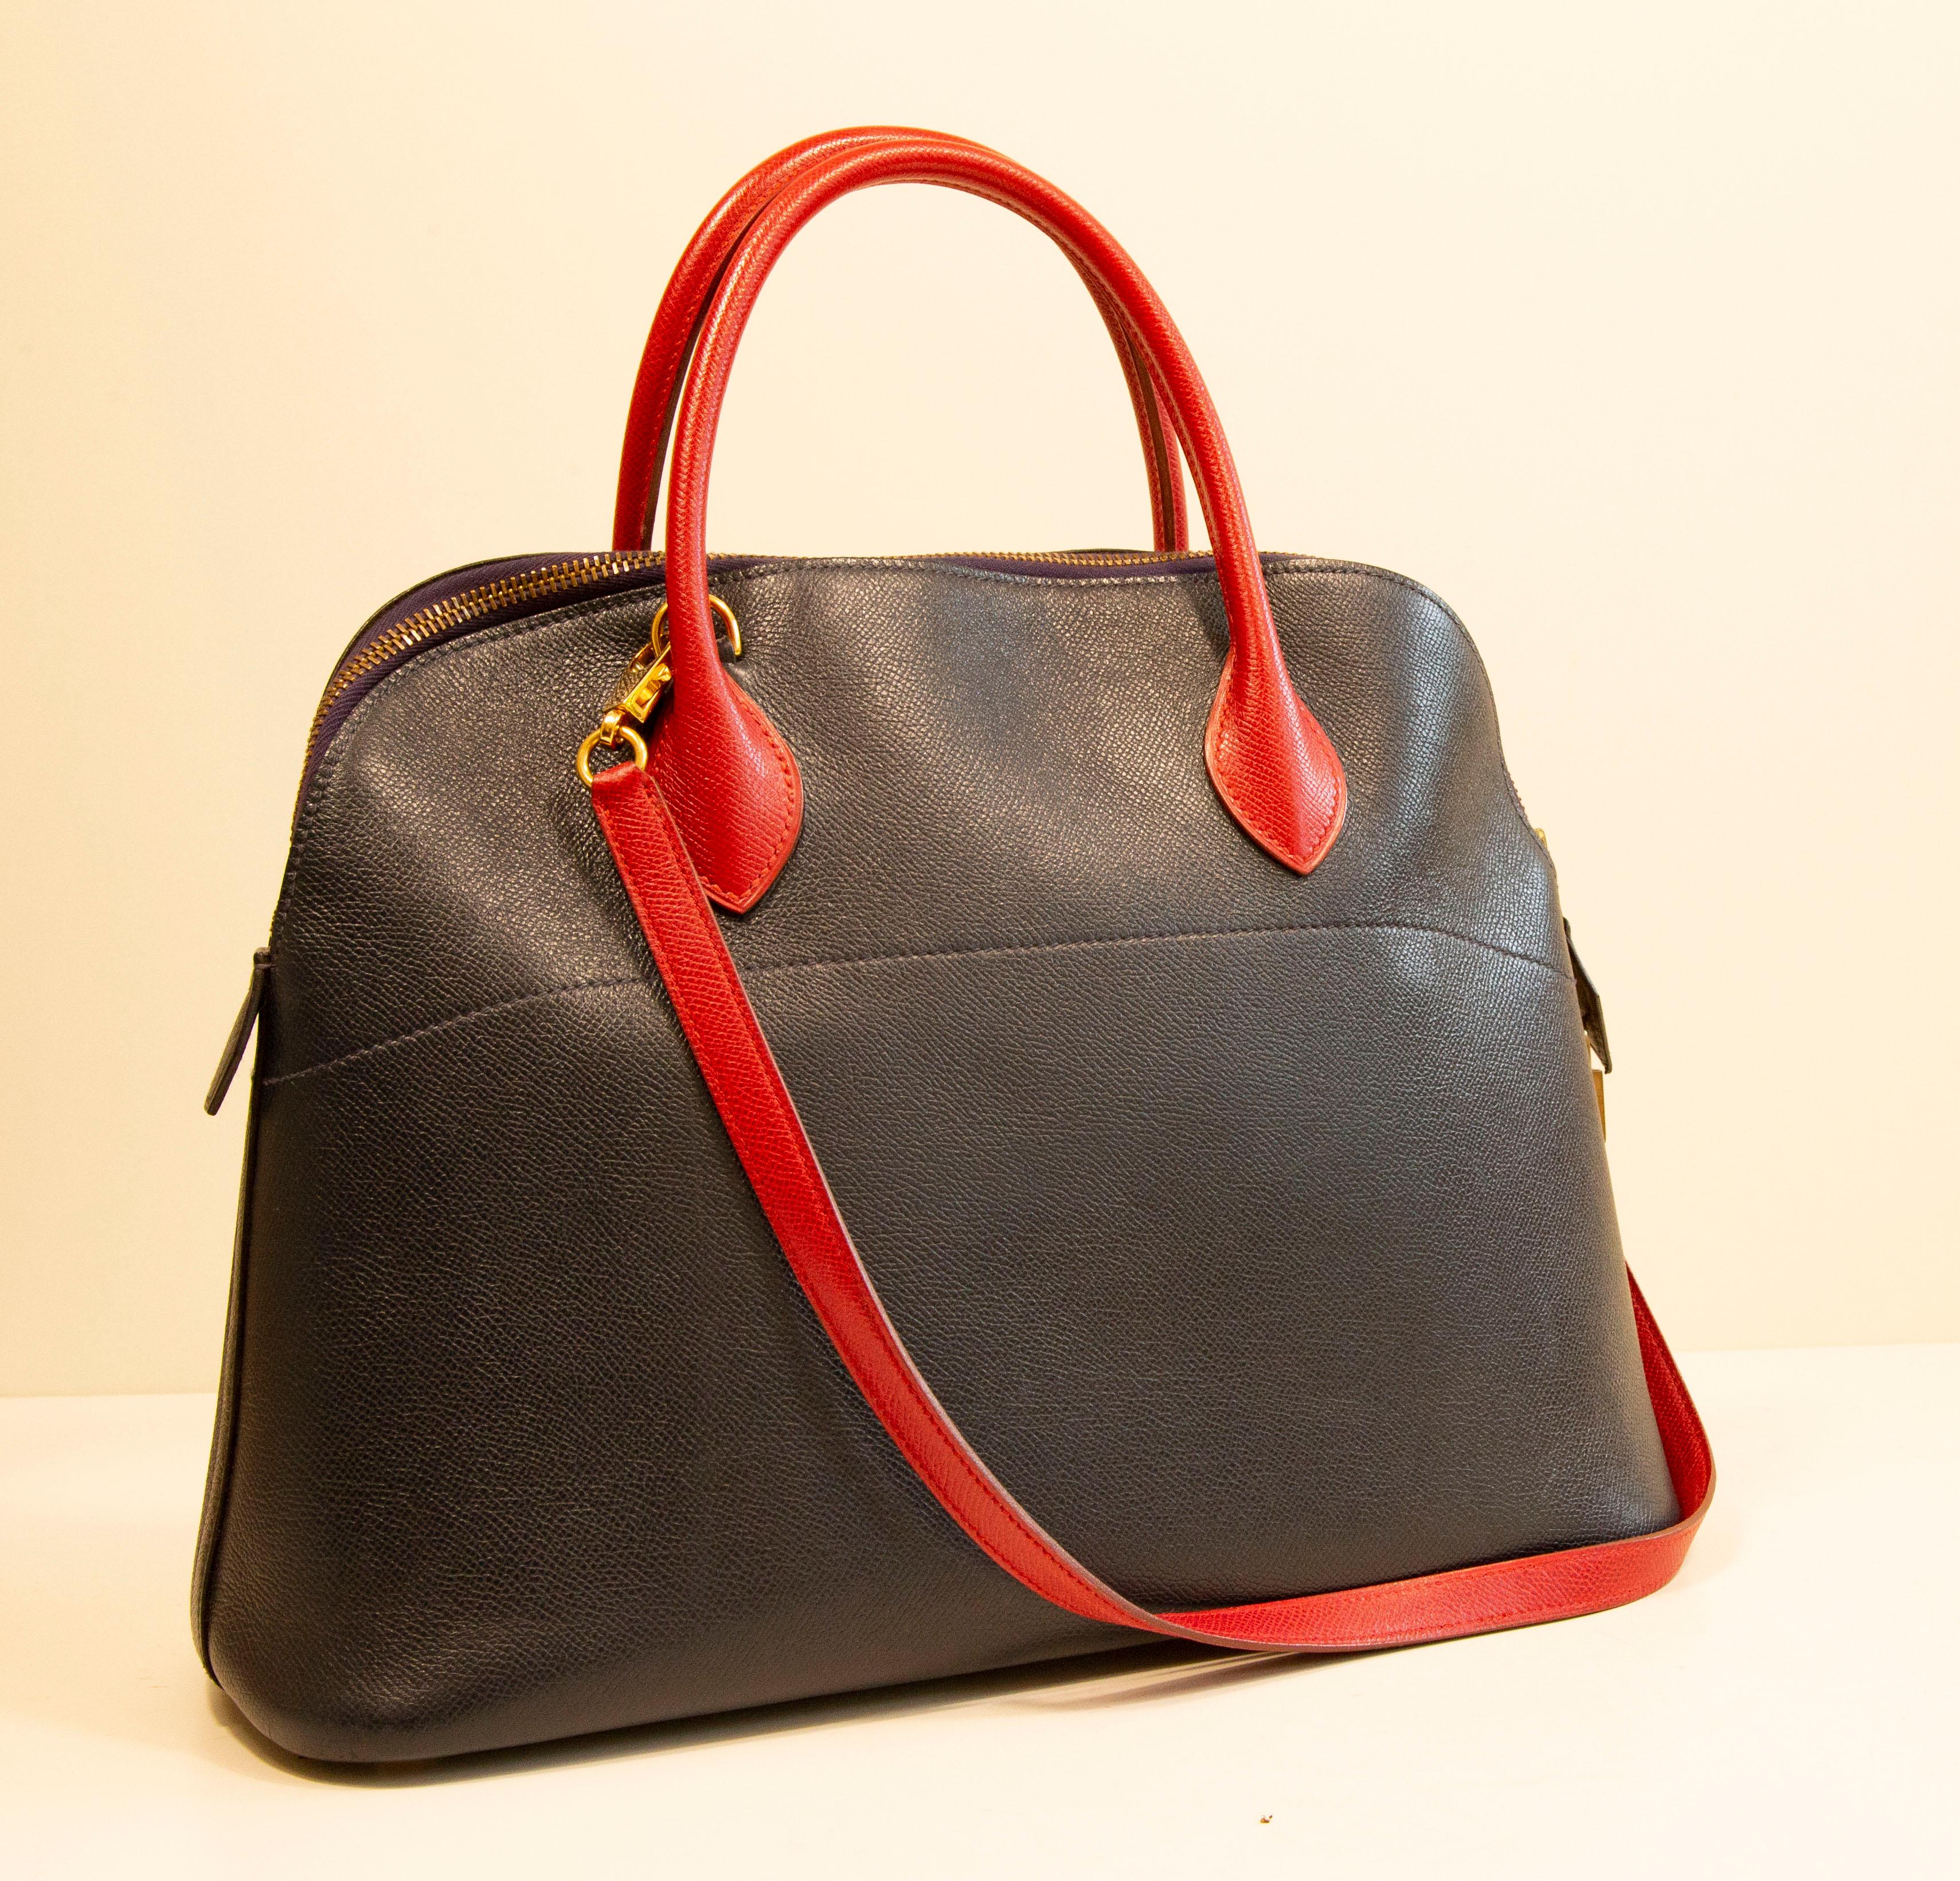 1990s Hermes Bolide 35 Bag in Navy Blue and Red Leather For Sale 1